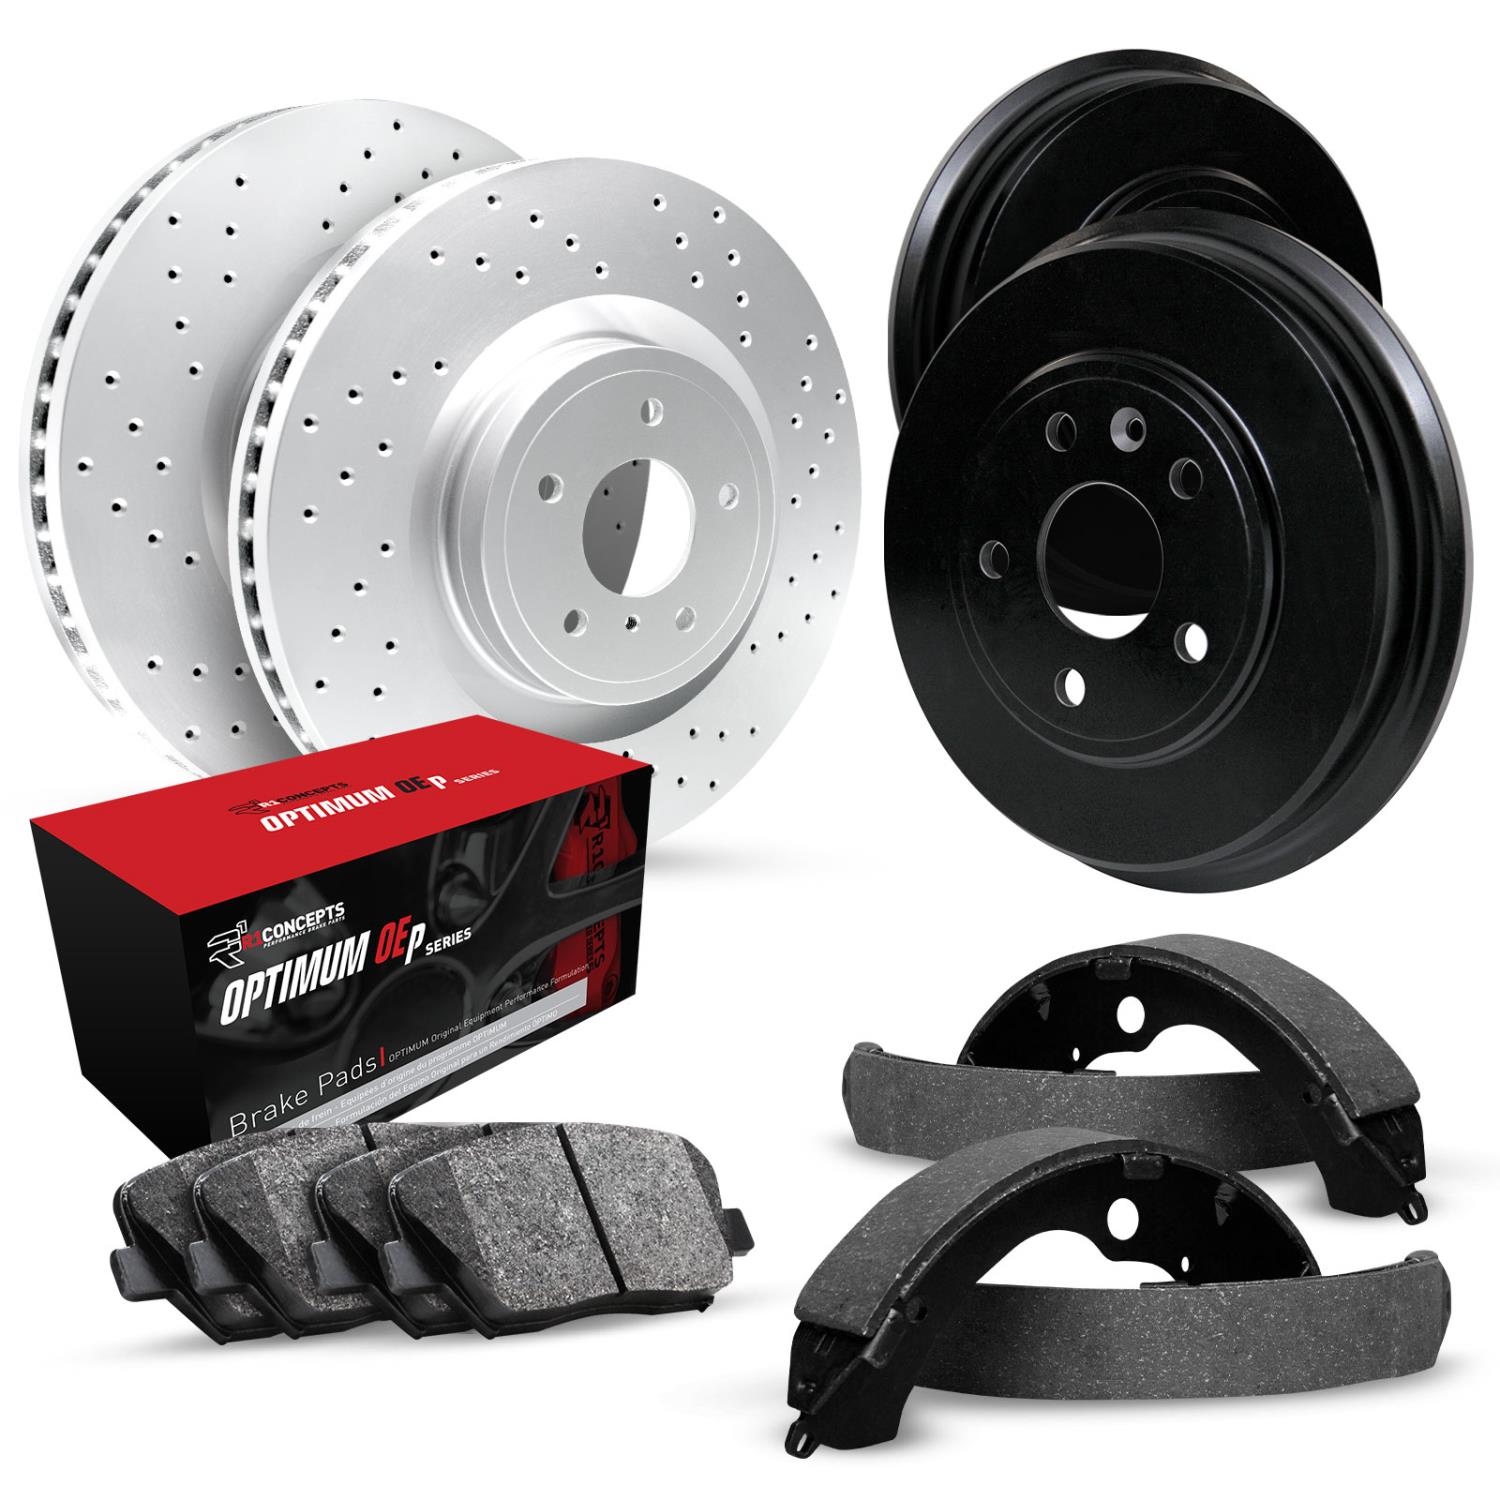 GEO-Carbon Drilled Brake Rotor & Drum Set w/Optimum OE Pads & Shoes, 1993-1993 GM, Position: Front & Rear